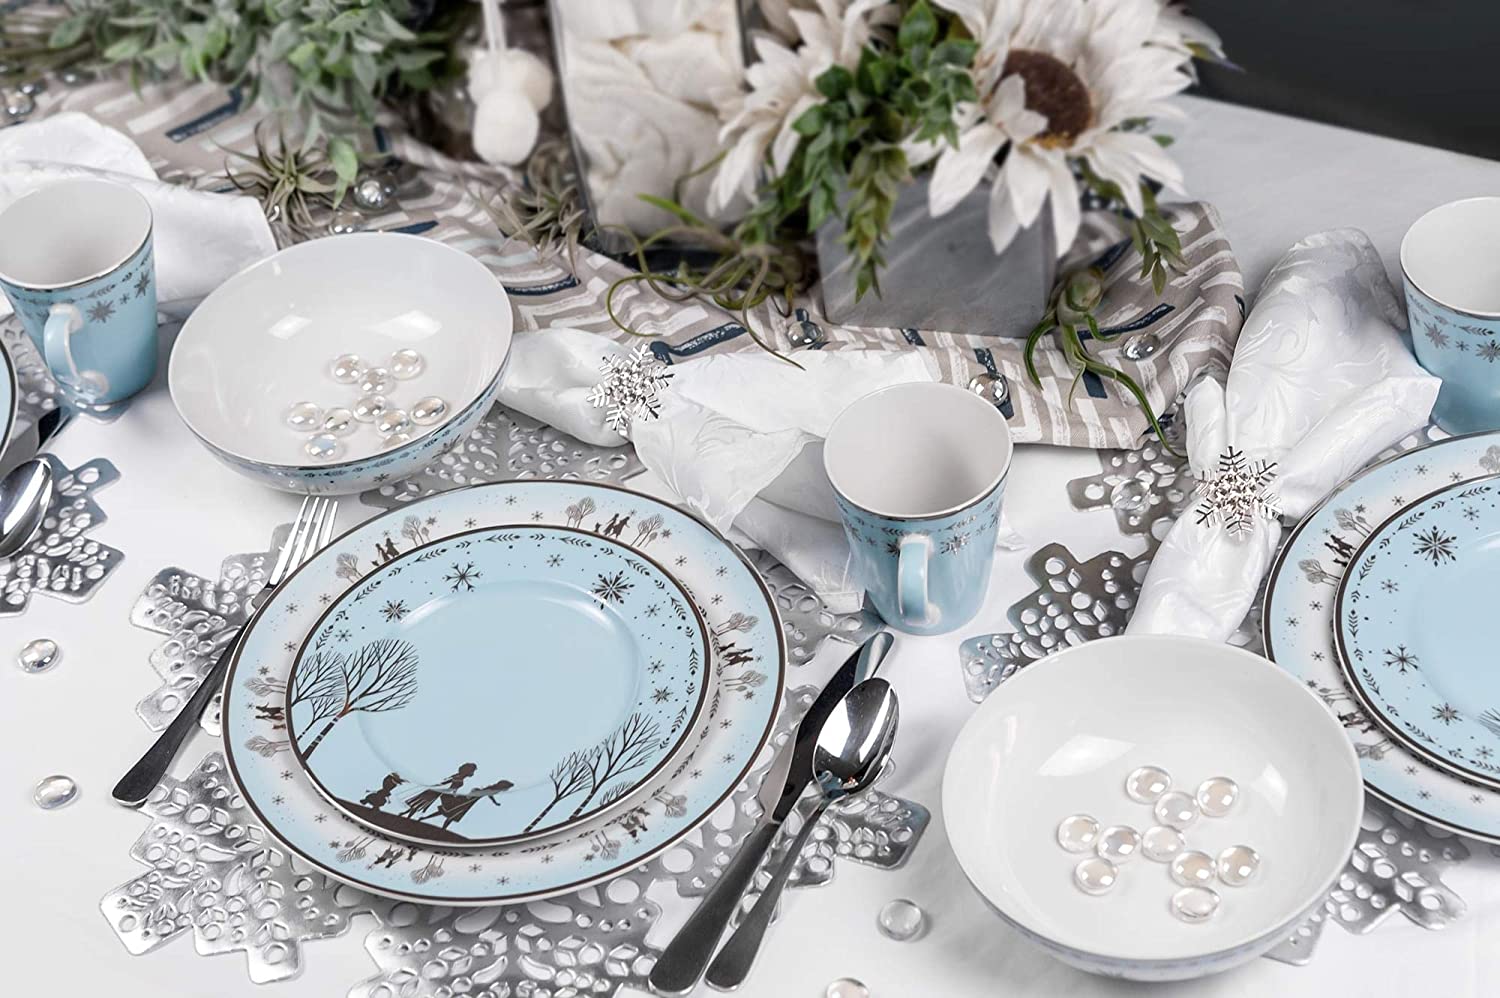 Set Your Table in Style with New Disney Dishes